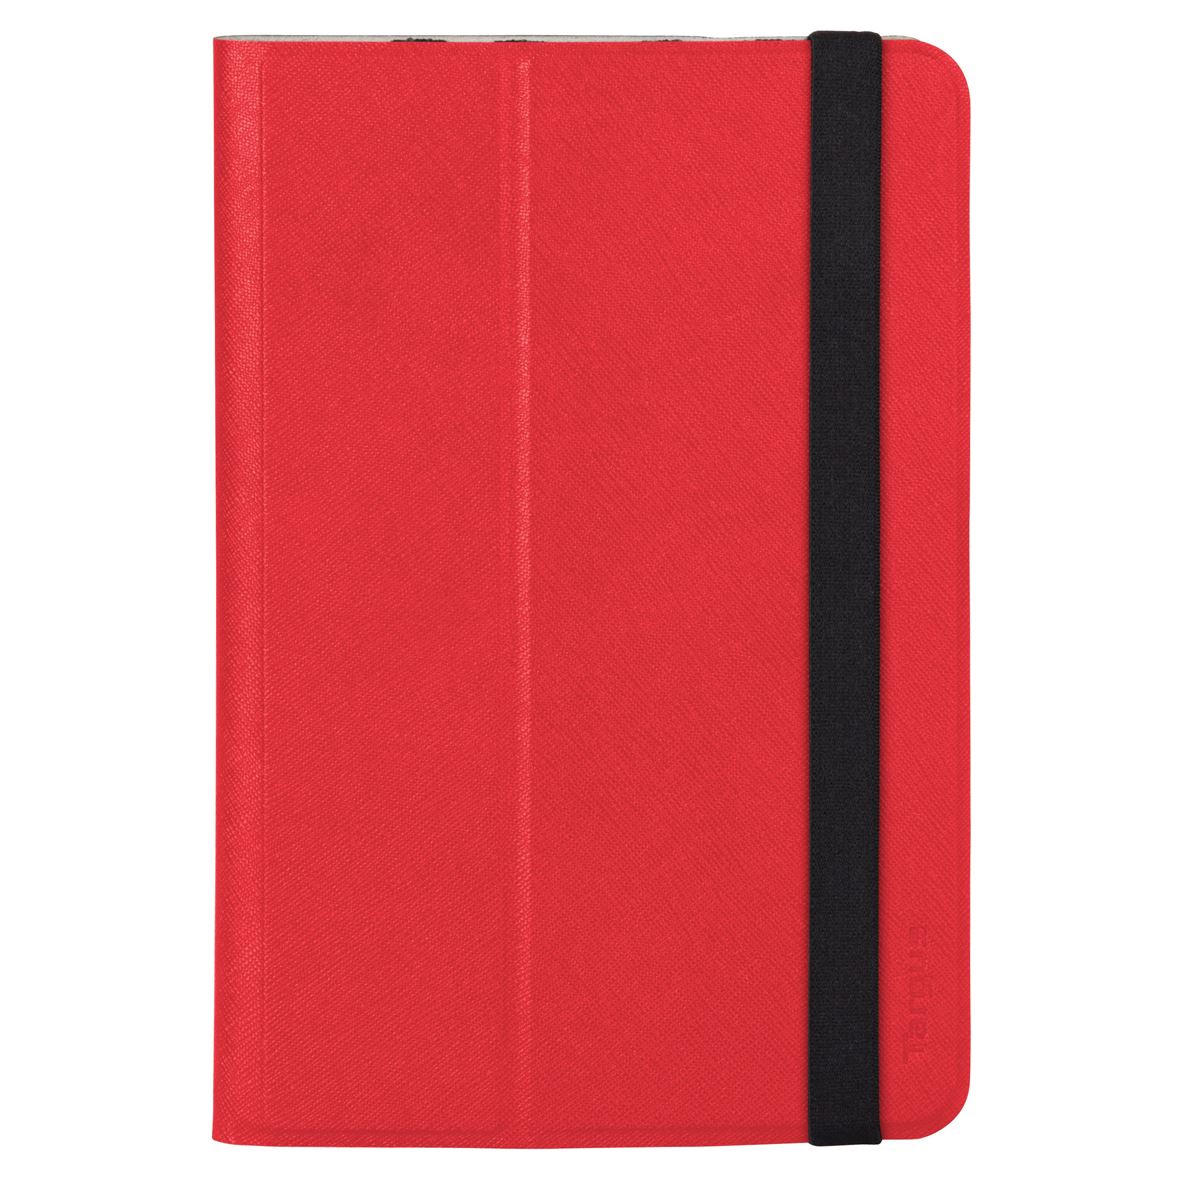 Base Universal Leather Pouch For 7-8" Tablets - Red